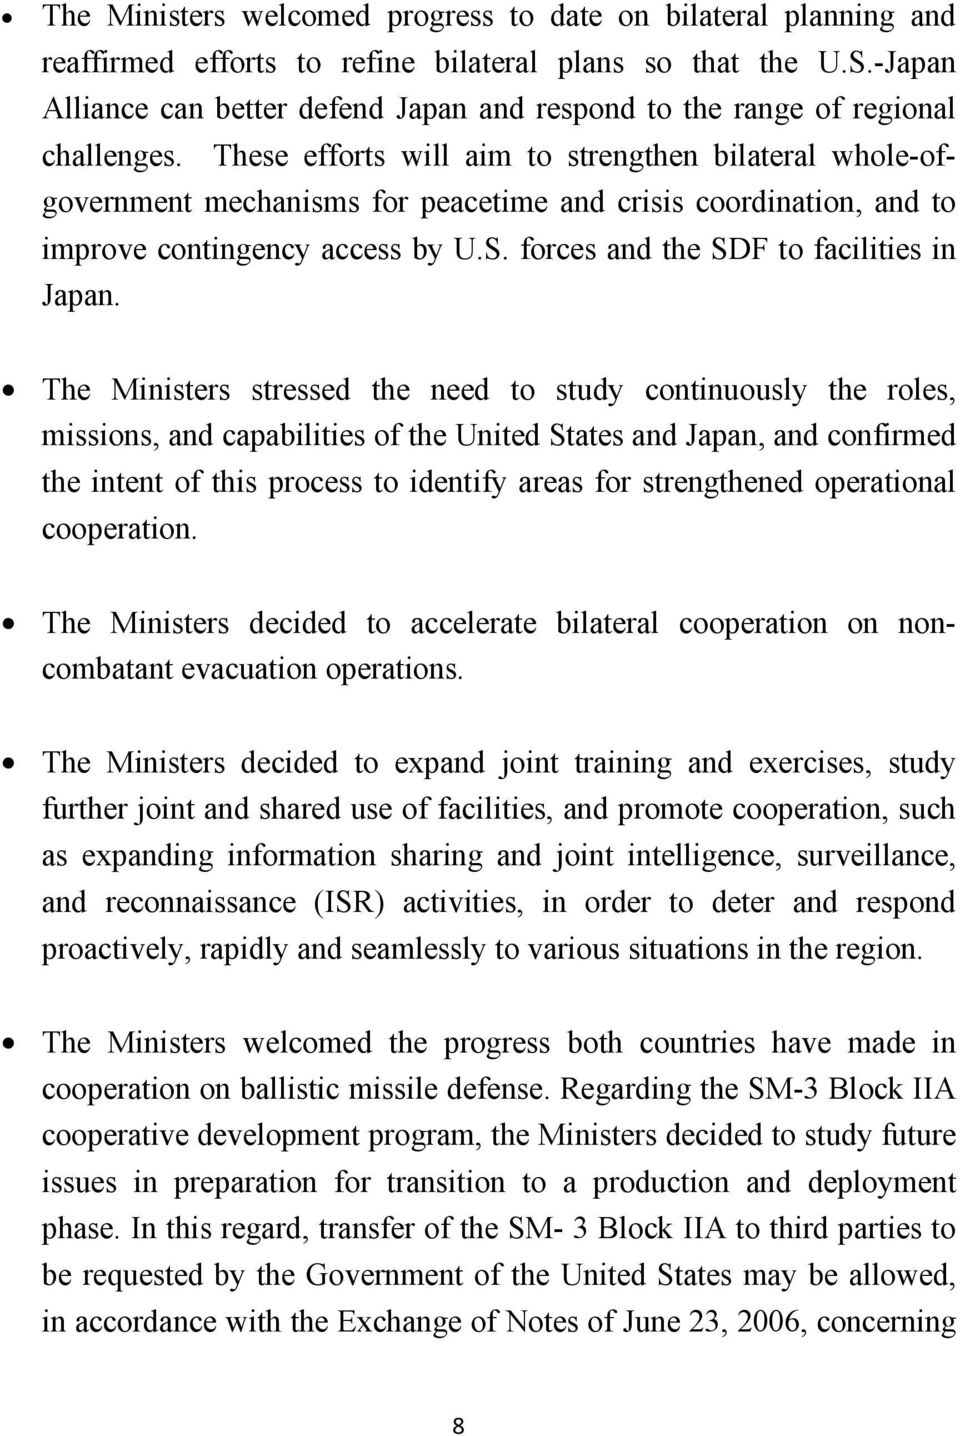 These efforts will aim to strengthen bilateral whole-ofgovernment mechanisms for peacetime and crisis coordination, and to improve contingency access by U.S. forces and the SDF to facilities in Japan.